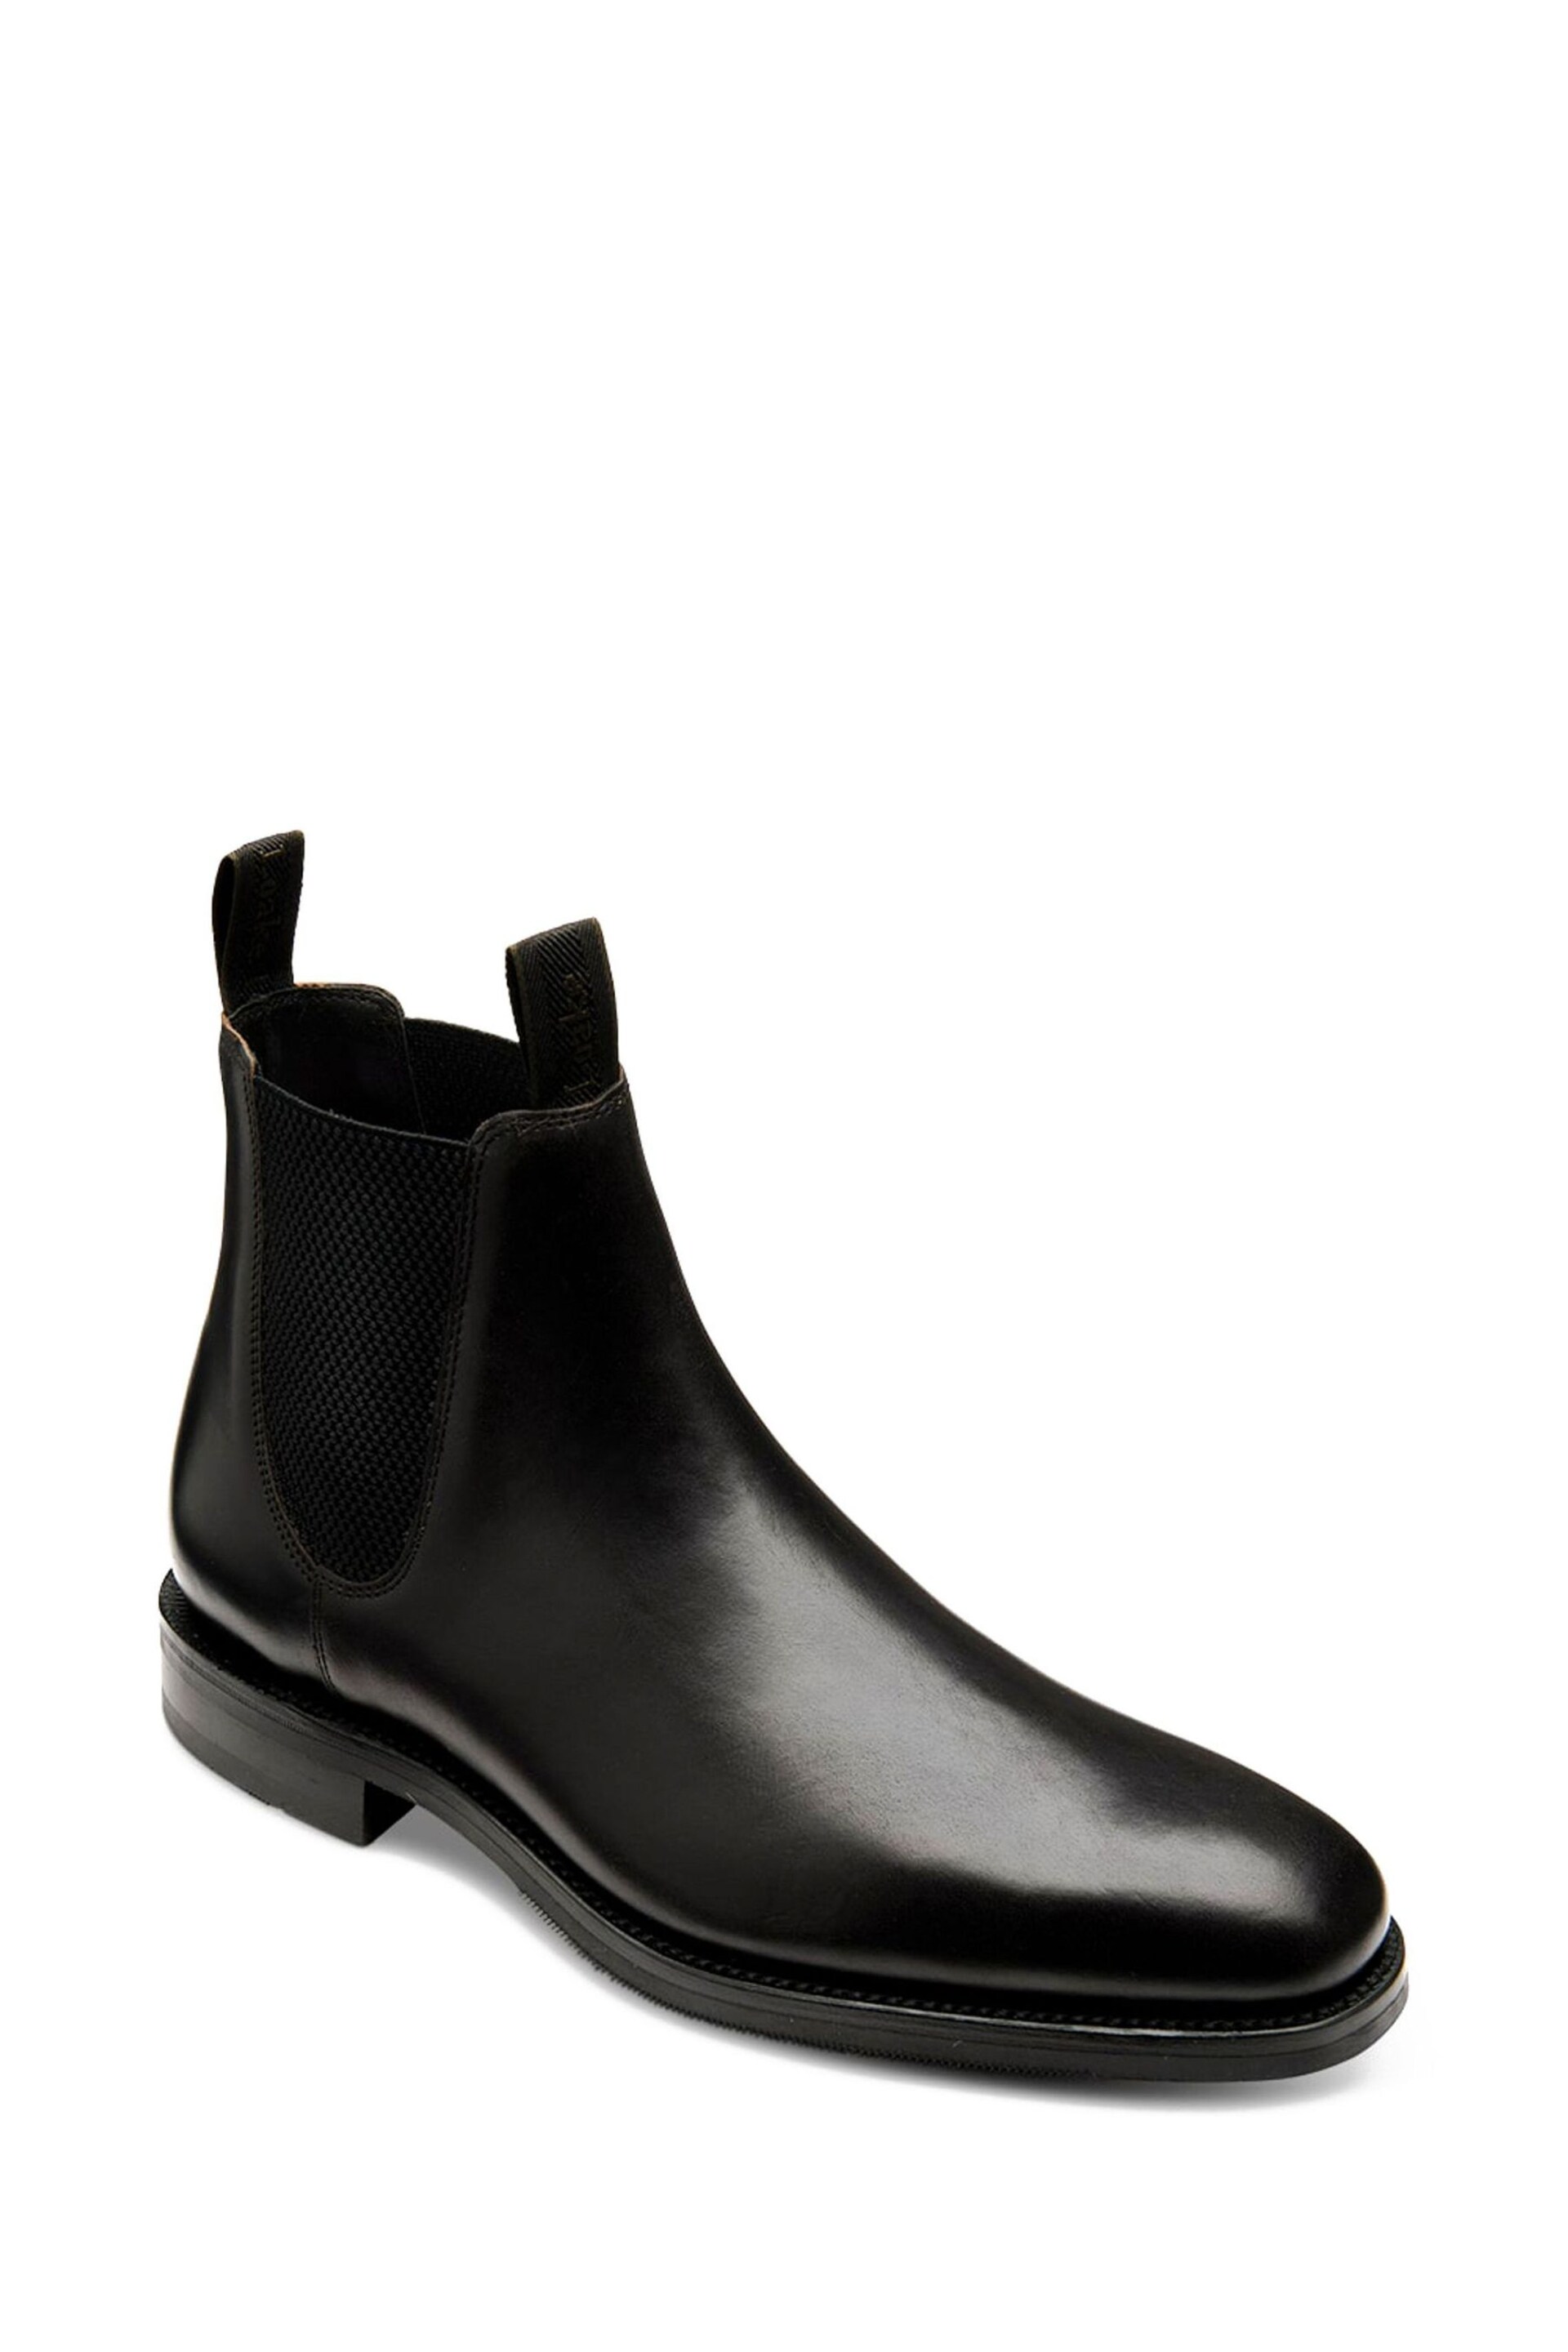 Loake Leather Chelsea Brown Boots - Image 4 of 5